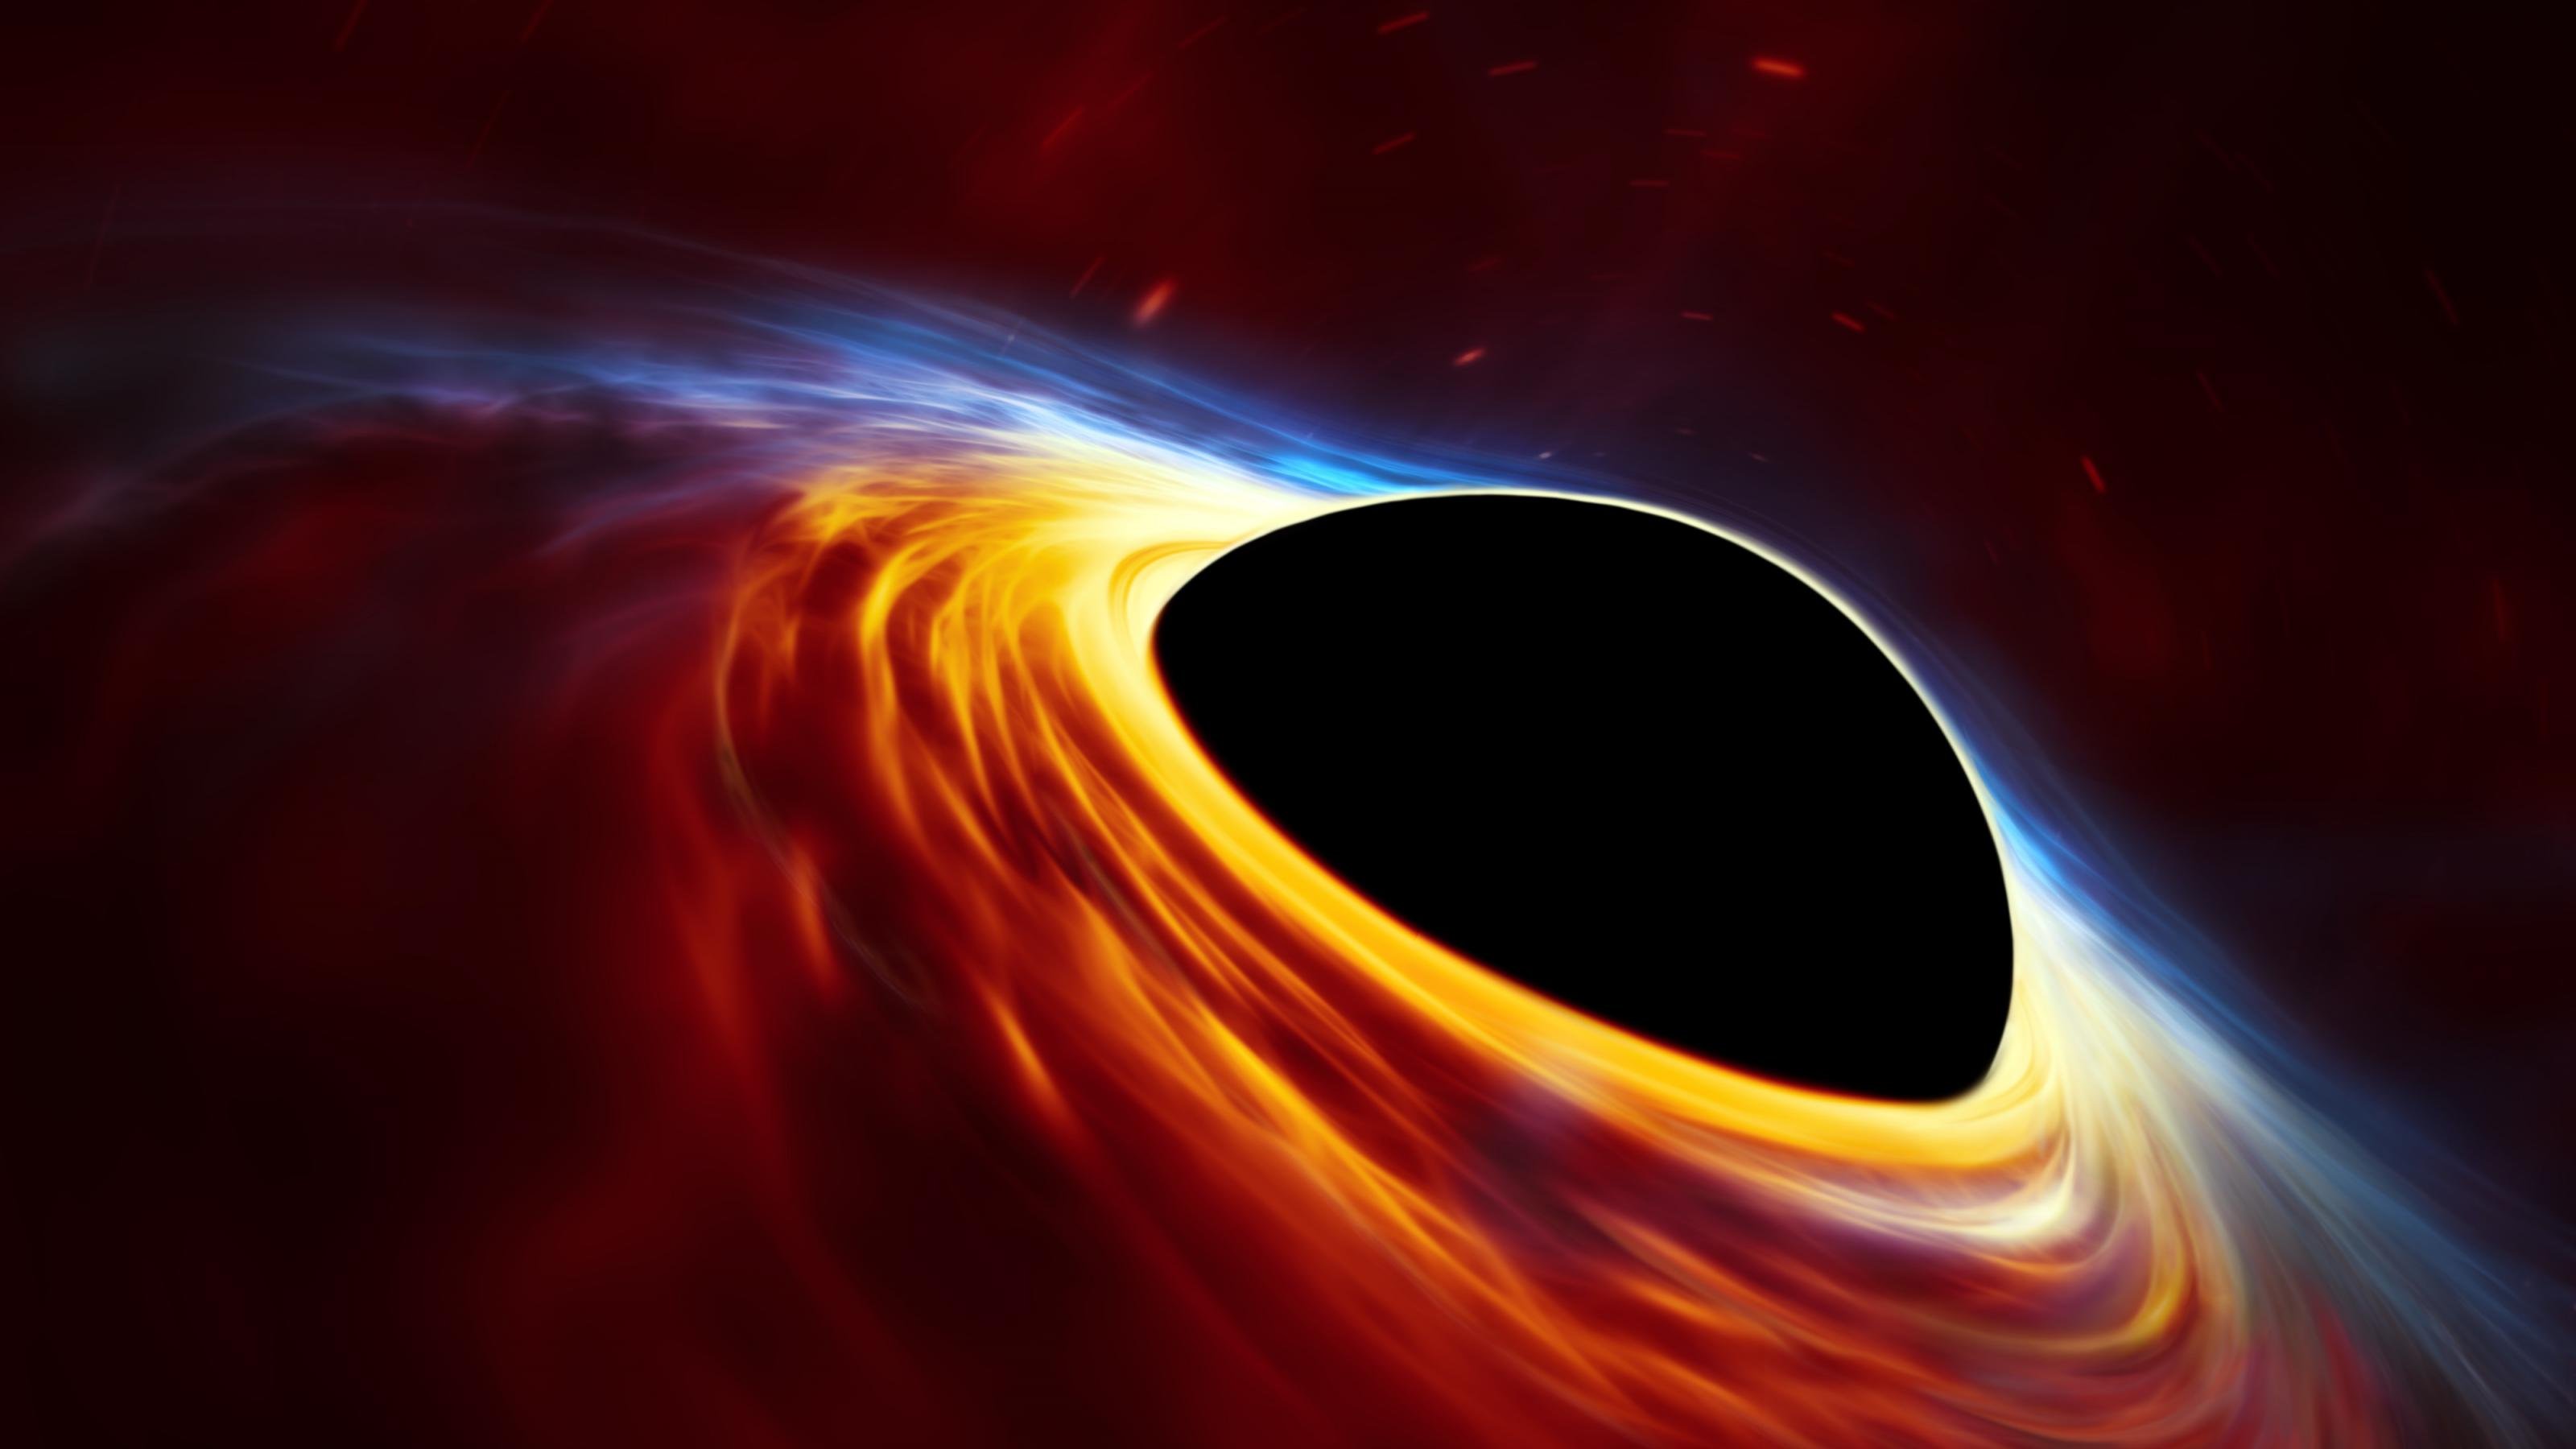 This artist?s impression depicts a rapidly spinning supermassive black hole surrounded by an accretion disc. This thin disc of rotating material consists of the leftovers of a Sun-like star which was ripped apart by the tidal forces of the black hole. Shocks in the colliding debris as well as heat generated in accretion led to a burst of light, resembling a supernova explosion.